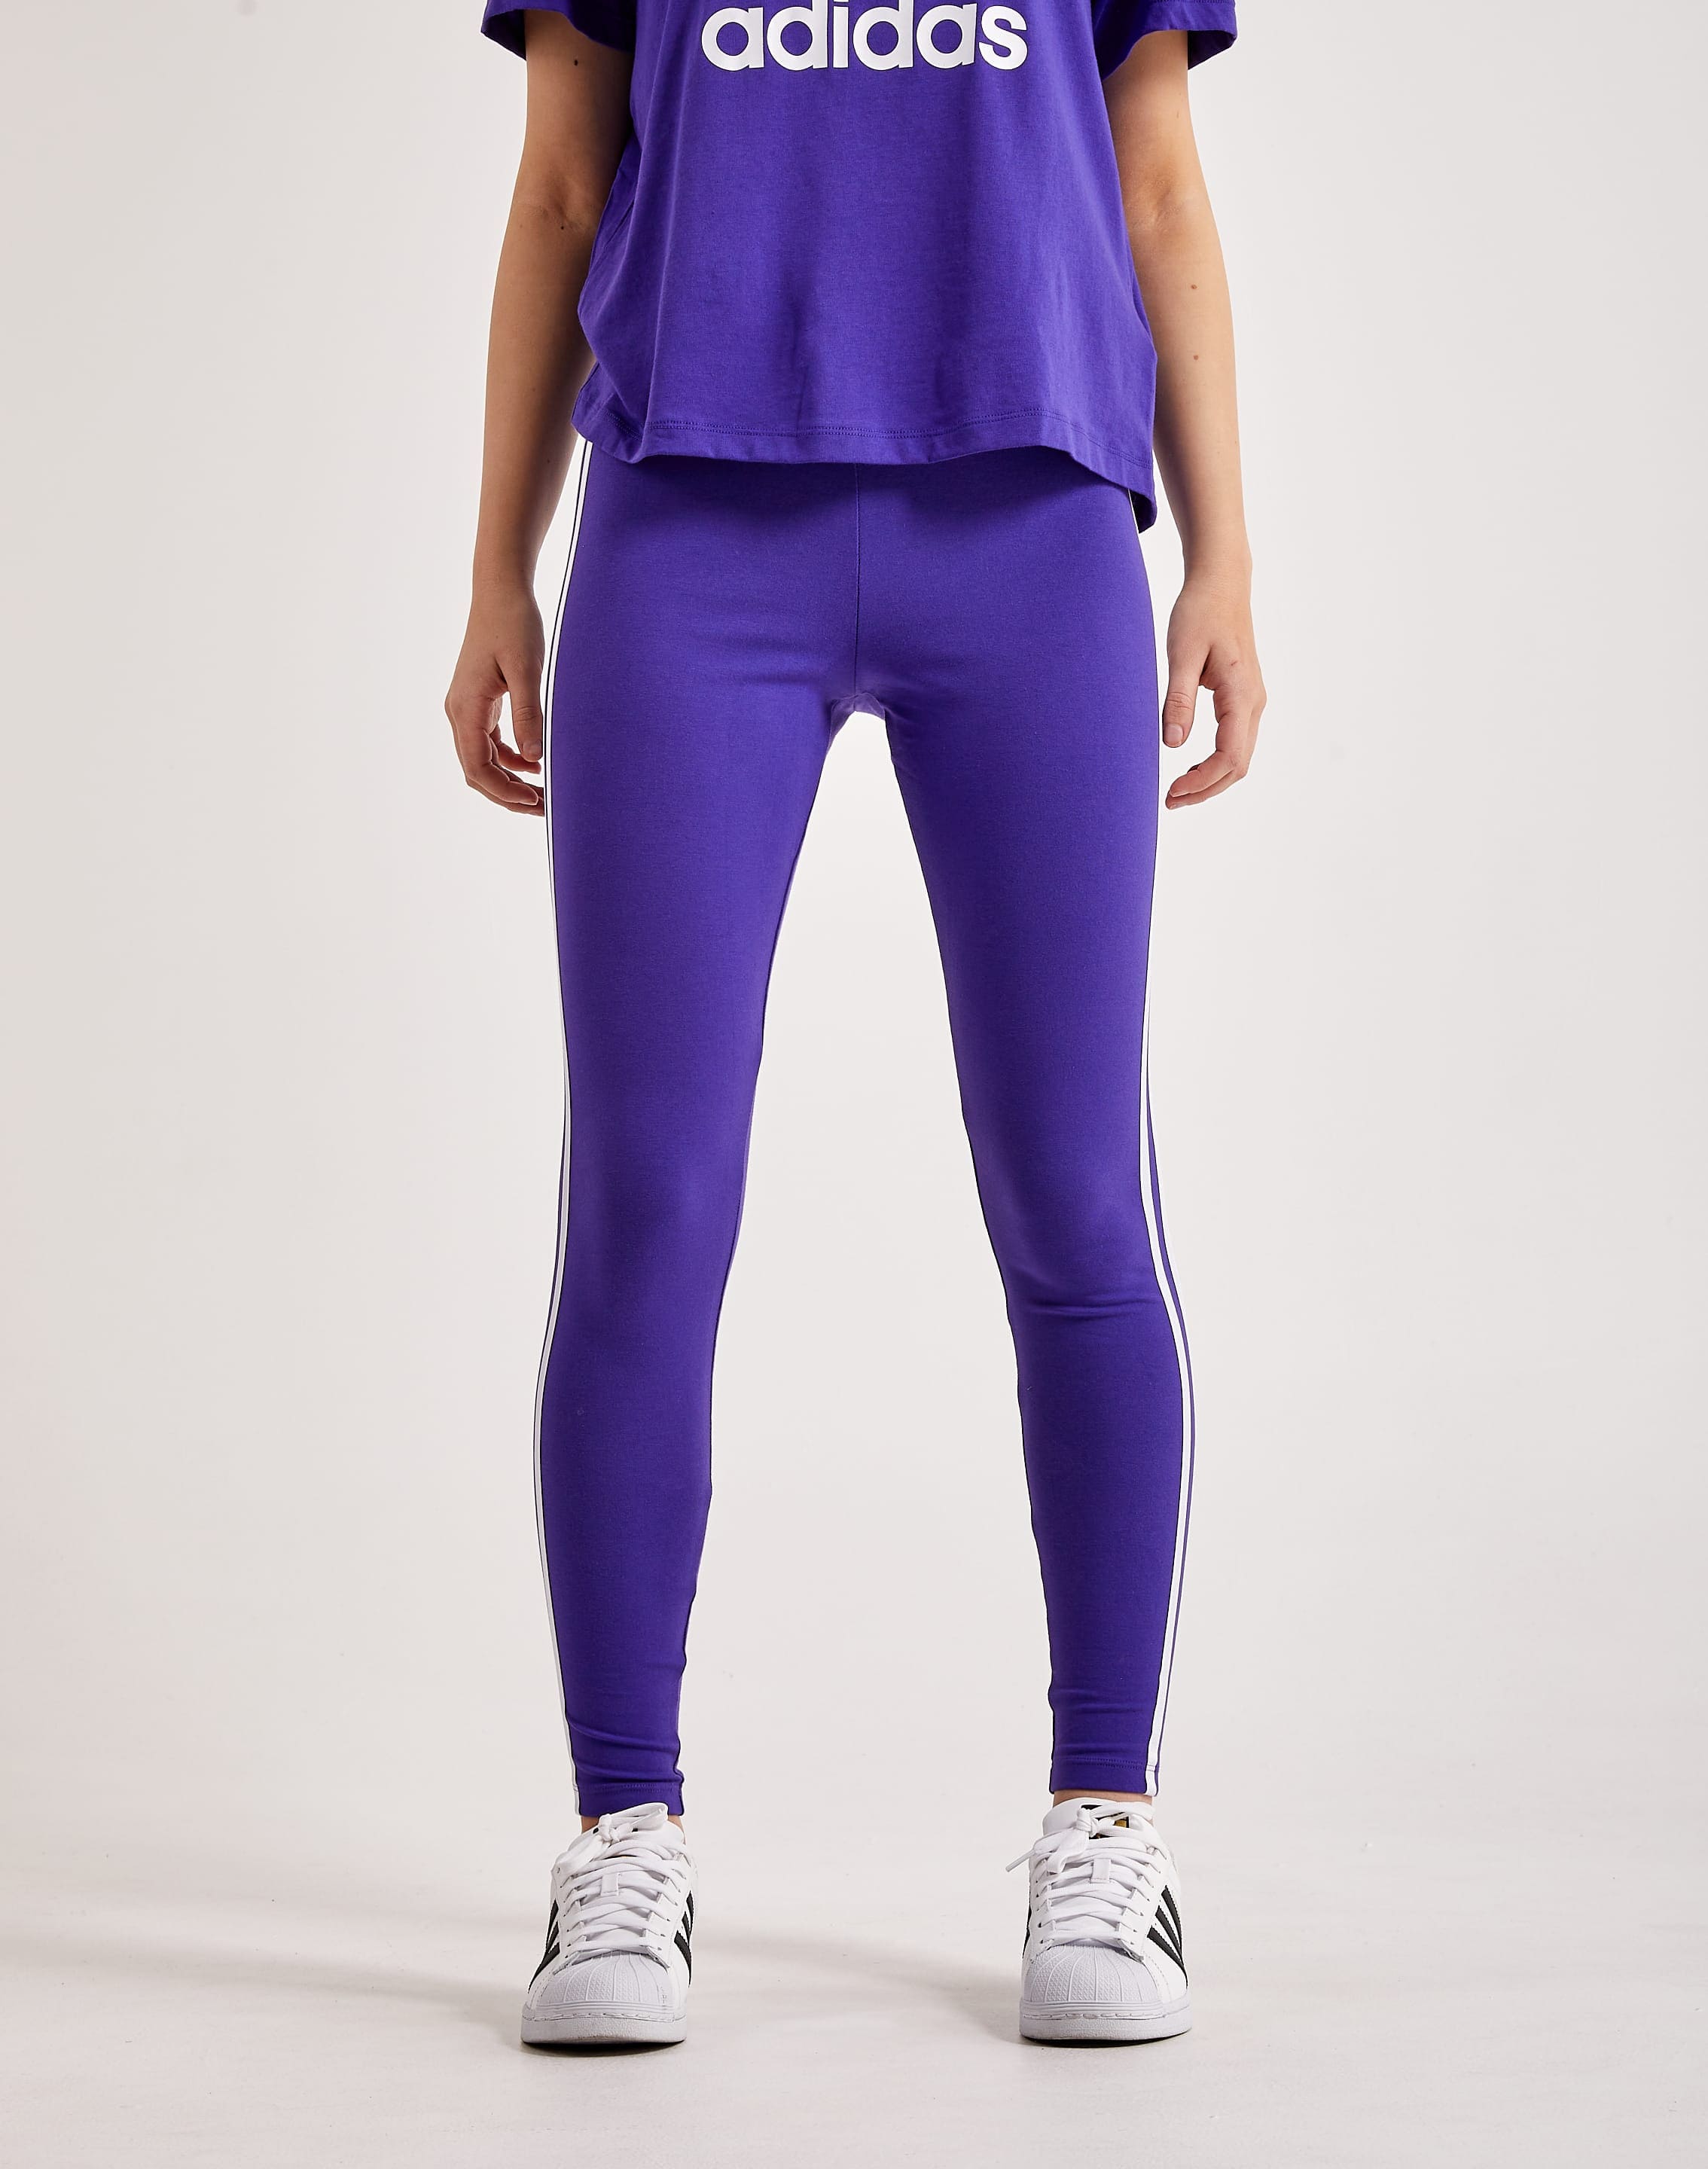 Adidas Legging Outfits-22 Ideas On How To Wear Adidas Tights | Outfits with  leggings, Adidas leggings outfit, Adidas outfit